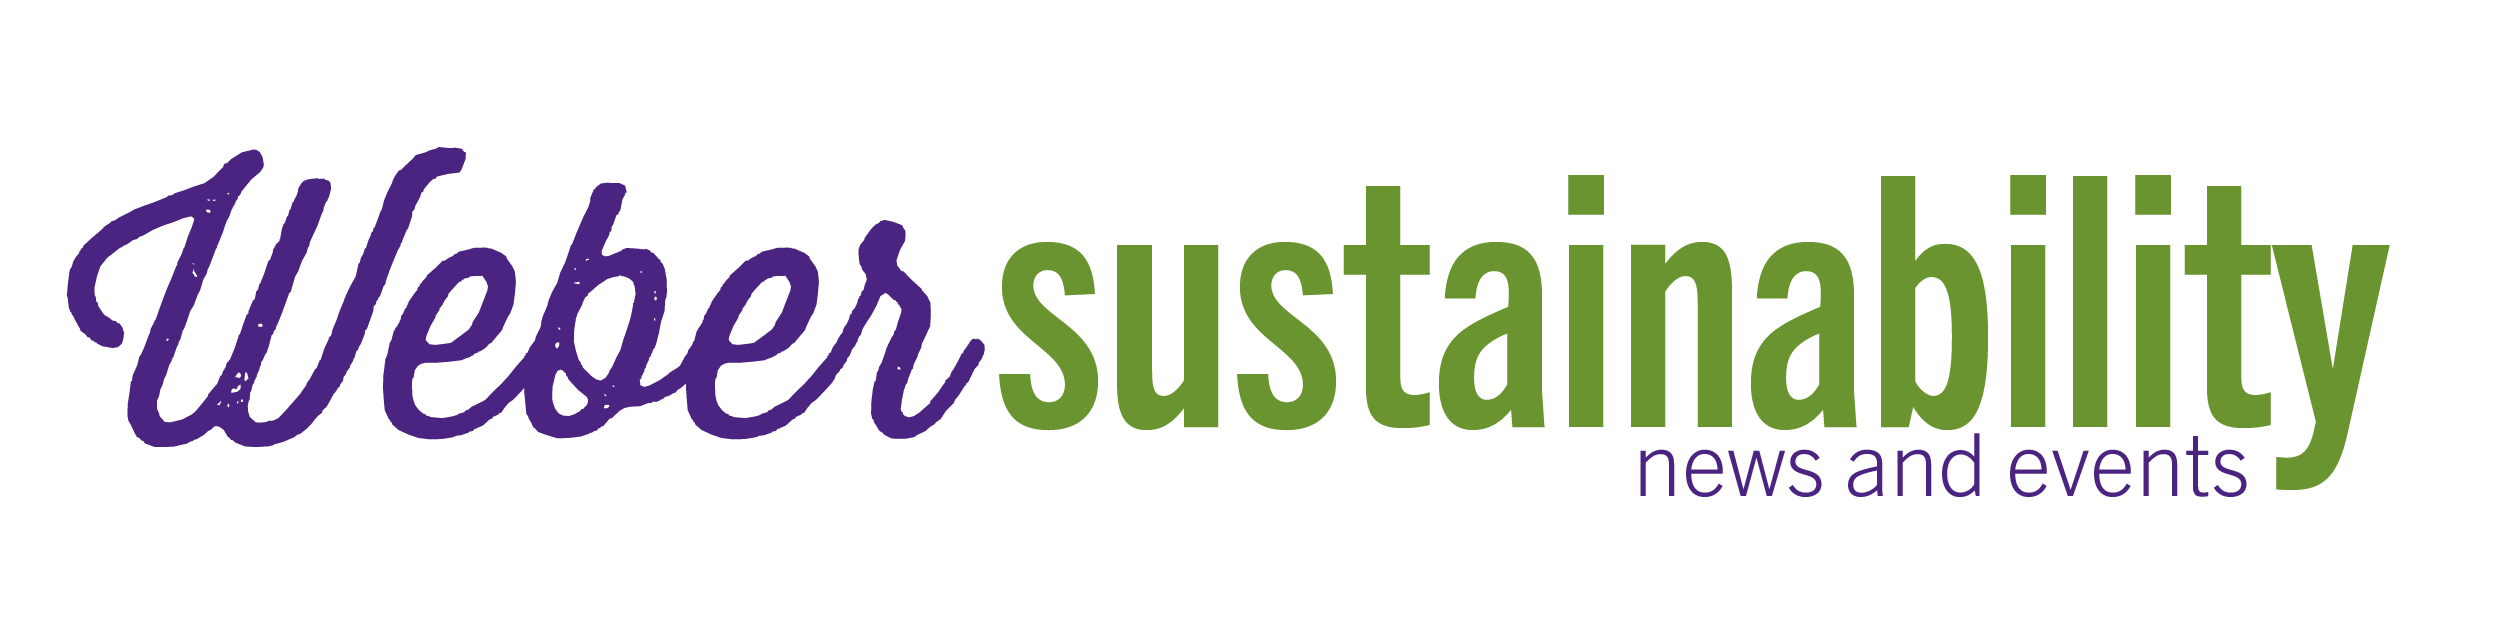 Weber Sustainability News and Events